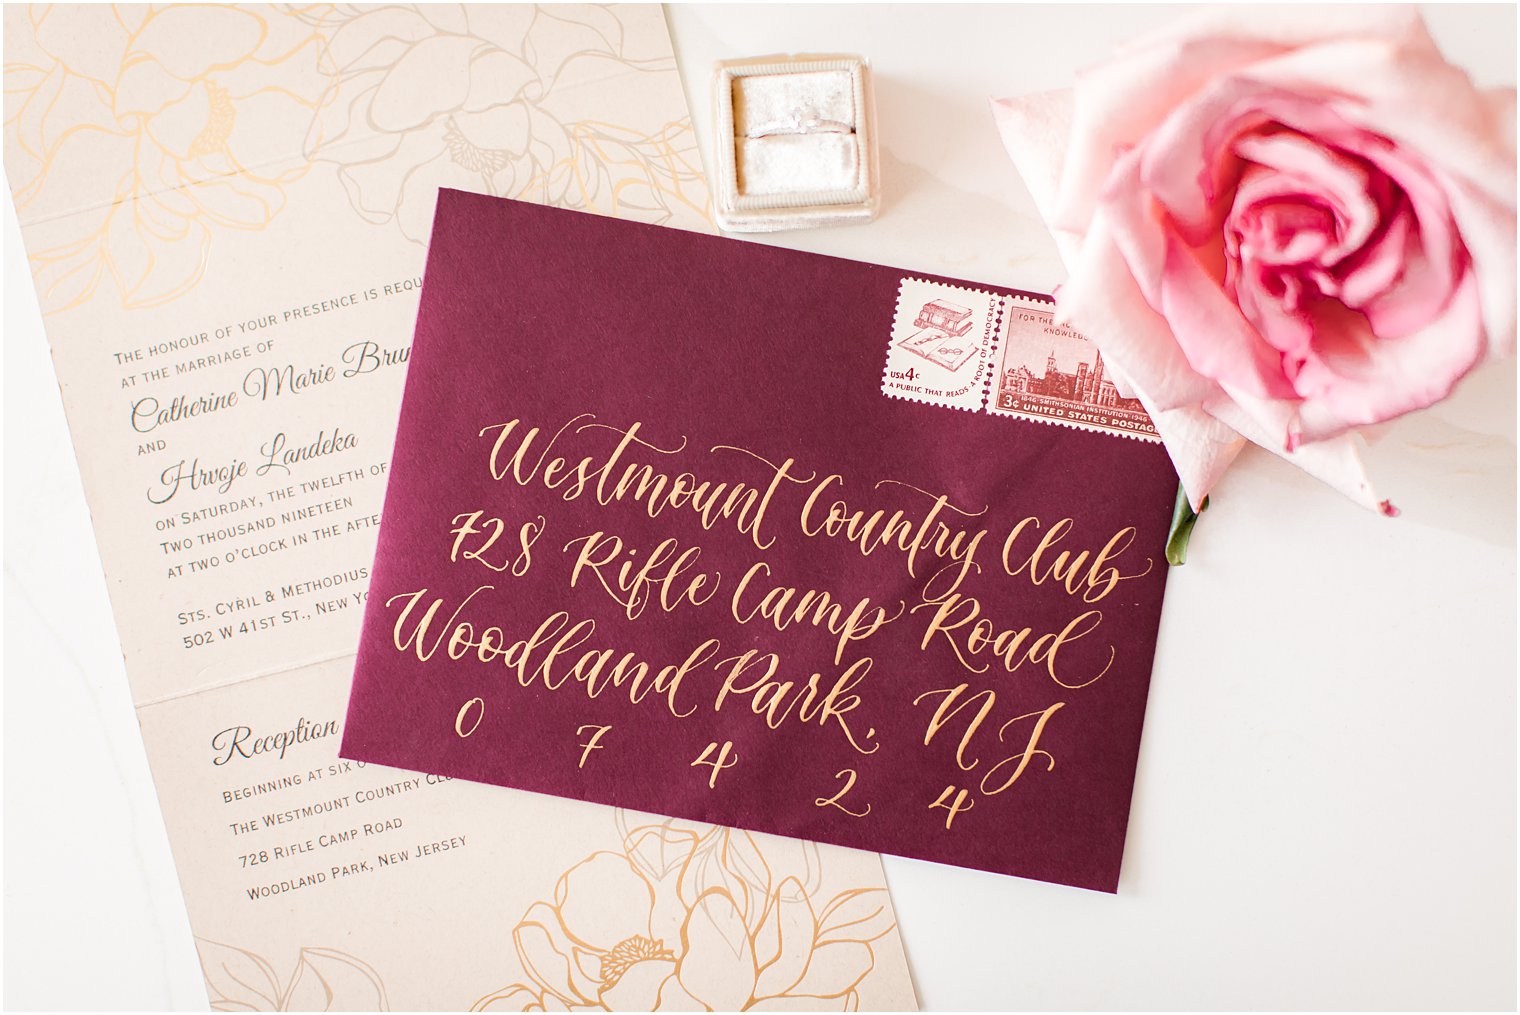 Burgundy and gold wedding invitations by Inviting Treasures